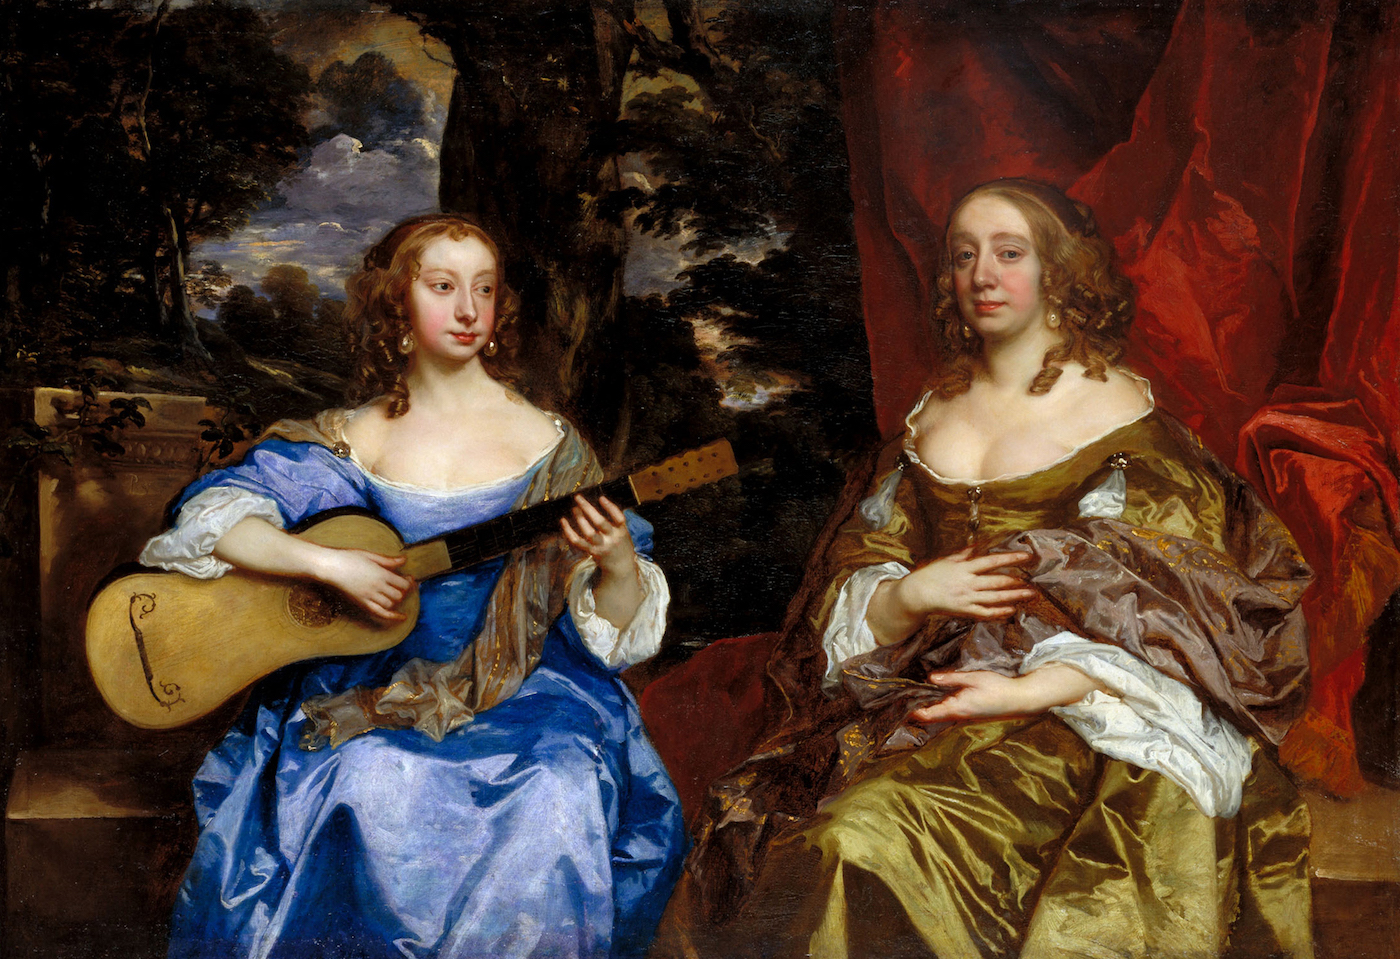 Sir Peter Lely, “Two Ladies of the Lake Family” (ca 1660), purchased with assistance from the Art Fund 1955</p>


<p>